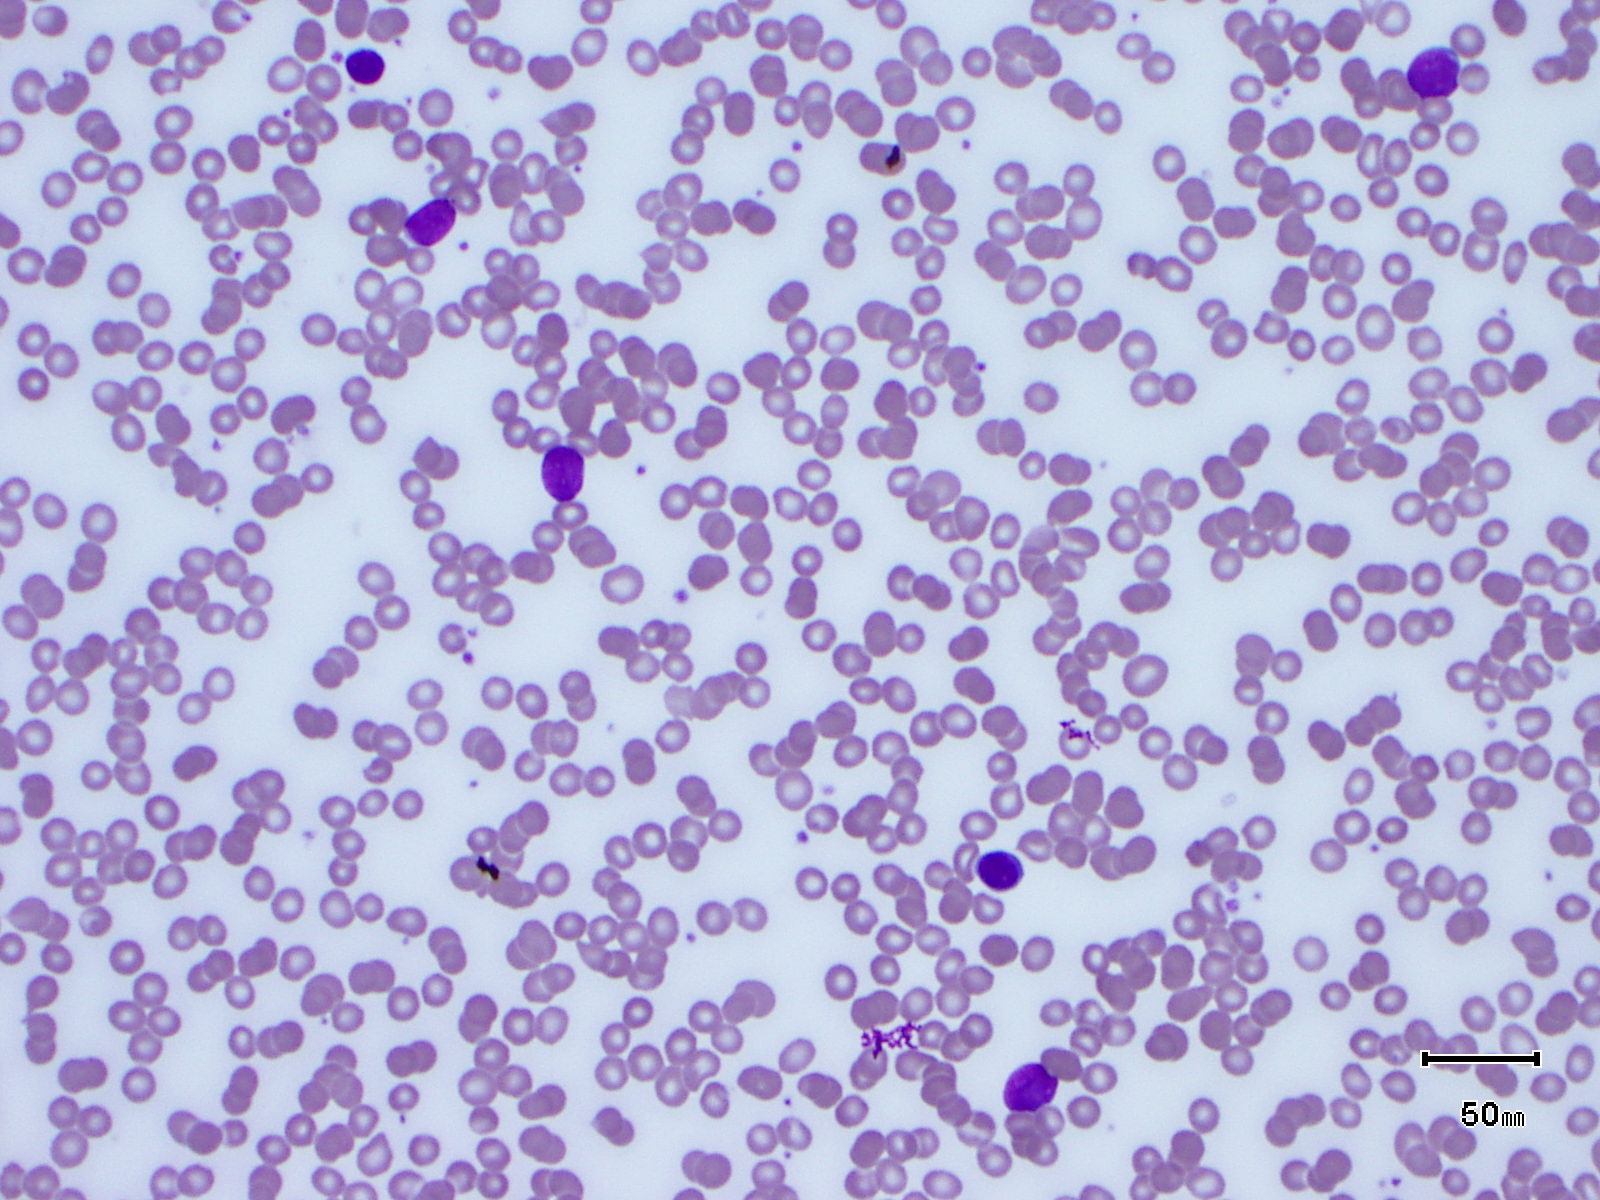 Picture of lymphocytes, a white blood cell, which can be affected by blood cancer